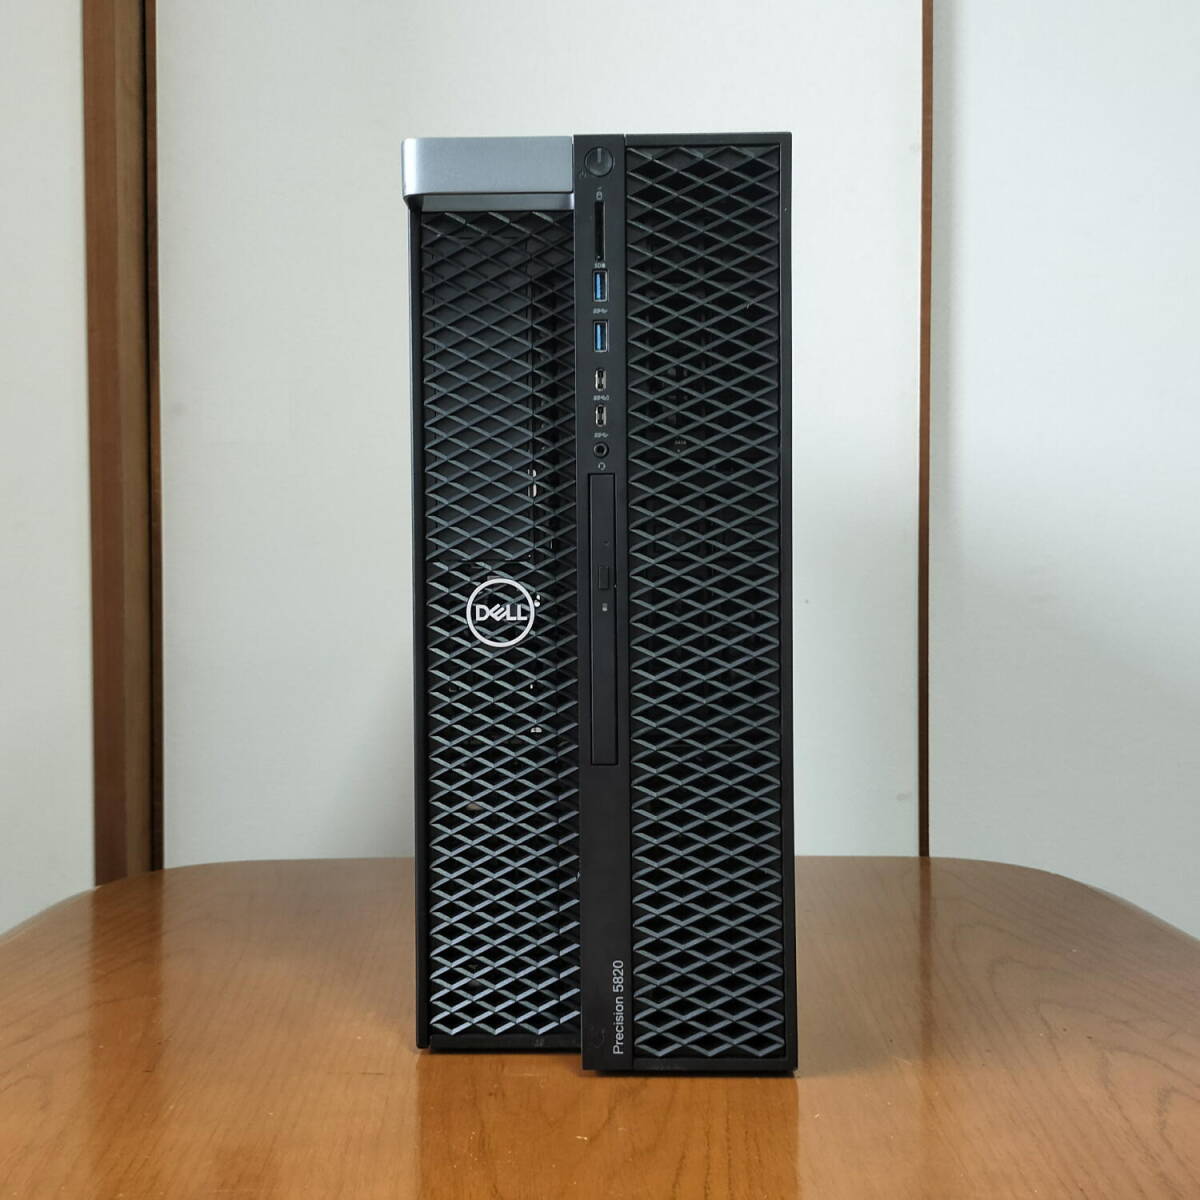 DELL Precision 5820 Tower Core i9-9900以上 最大4.50GHz 8コア 16スレッド 32GB GTX 1660Ti 搭載ゲーミングPC！ 爆速 M.2 NVMe SSD 1TBの画像2